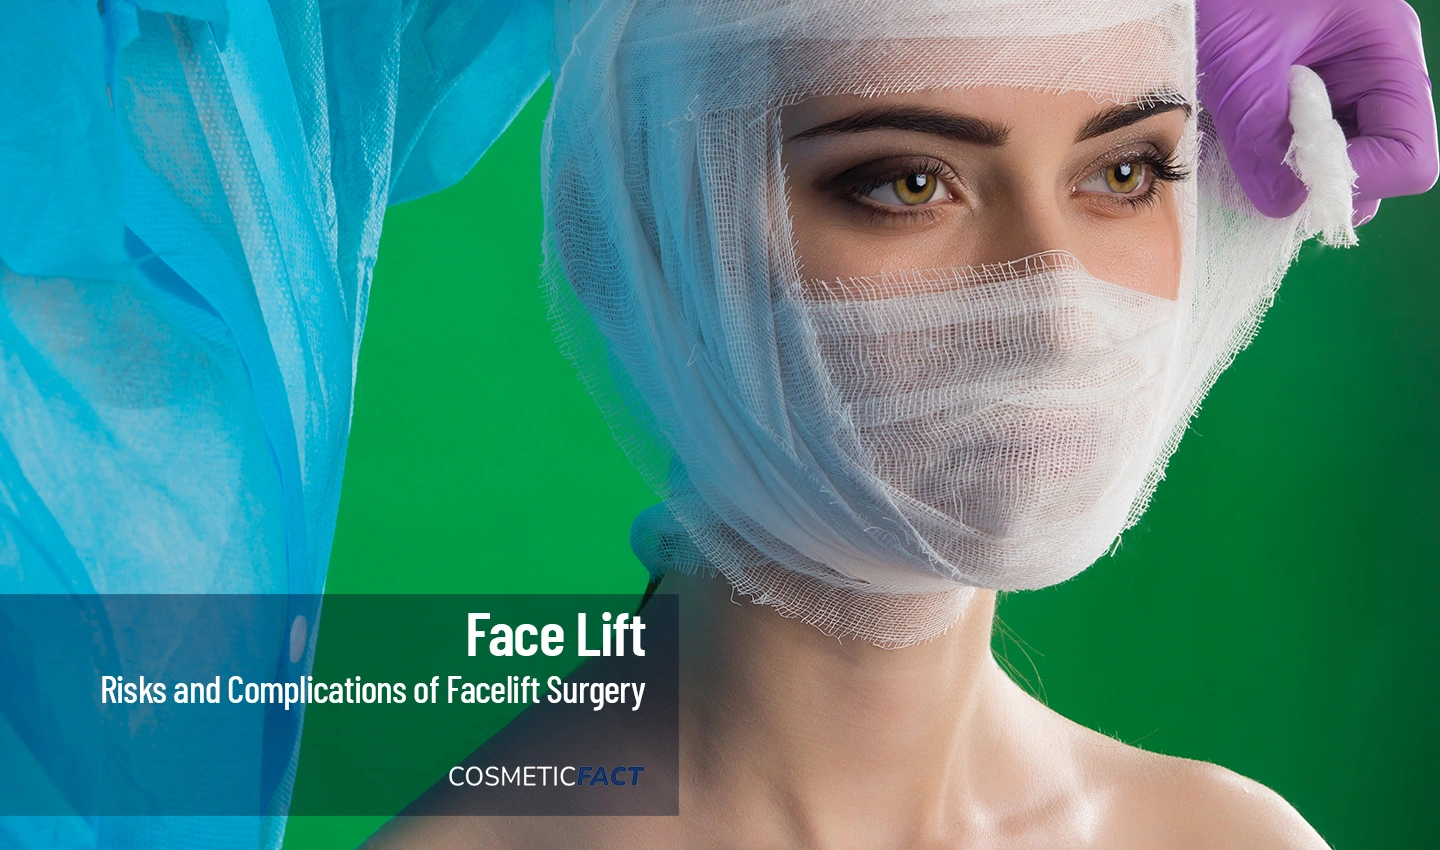 Woman with a bandage on her face after facelift surgery depicting the risks and complications of facelift surgery.